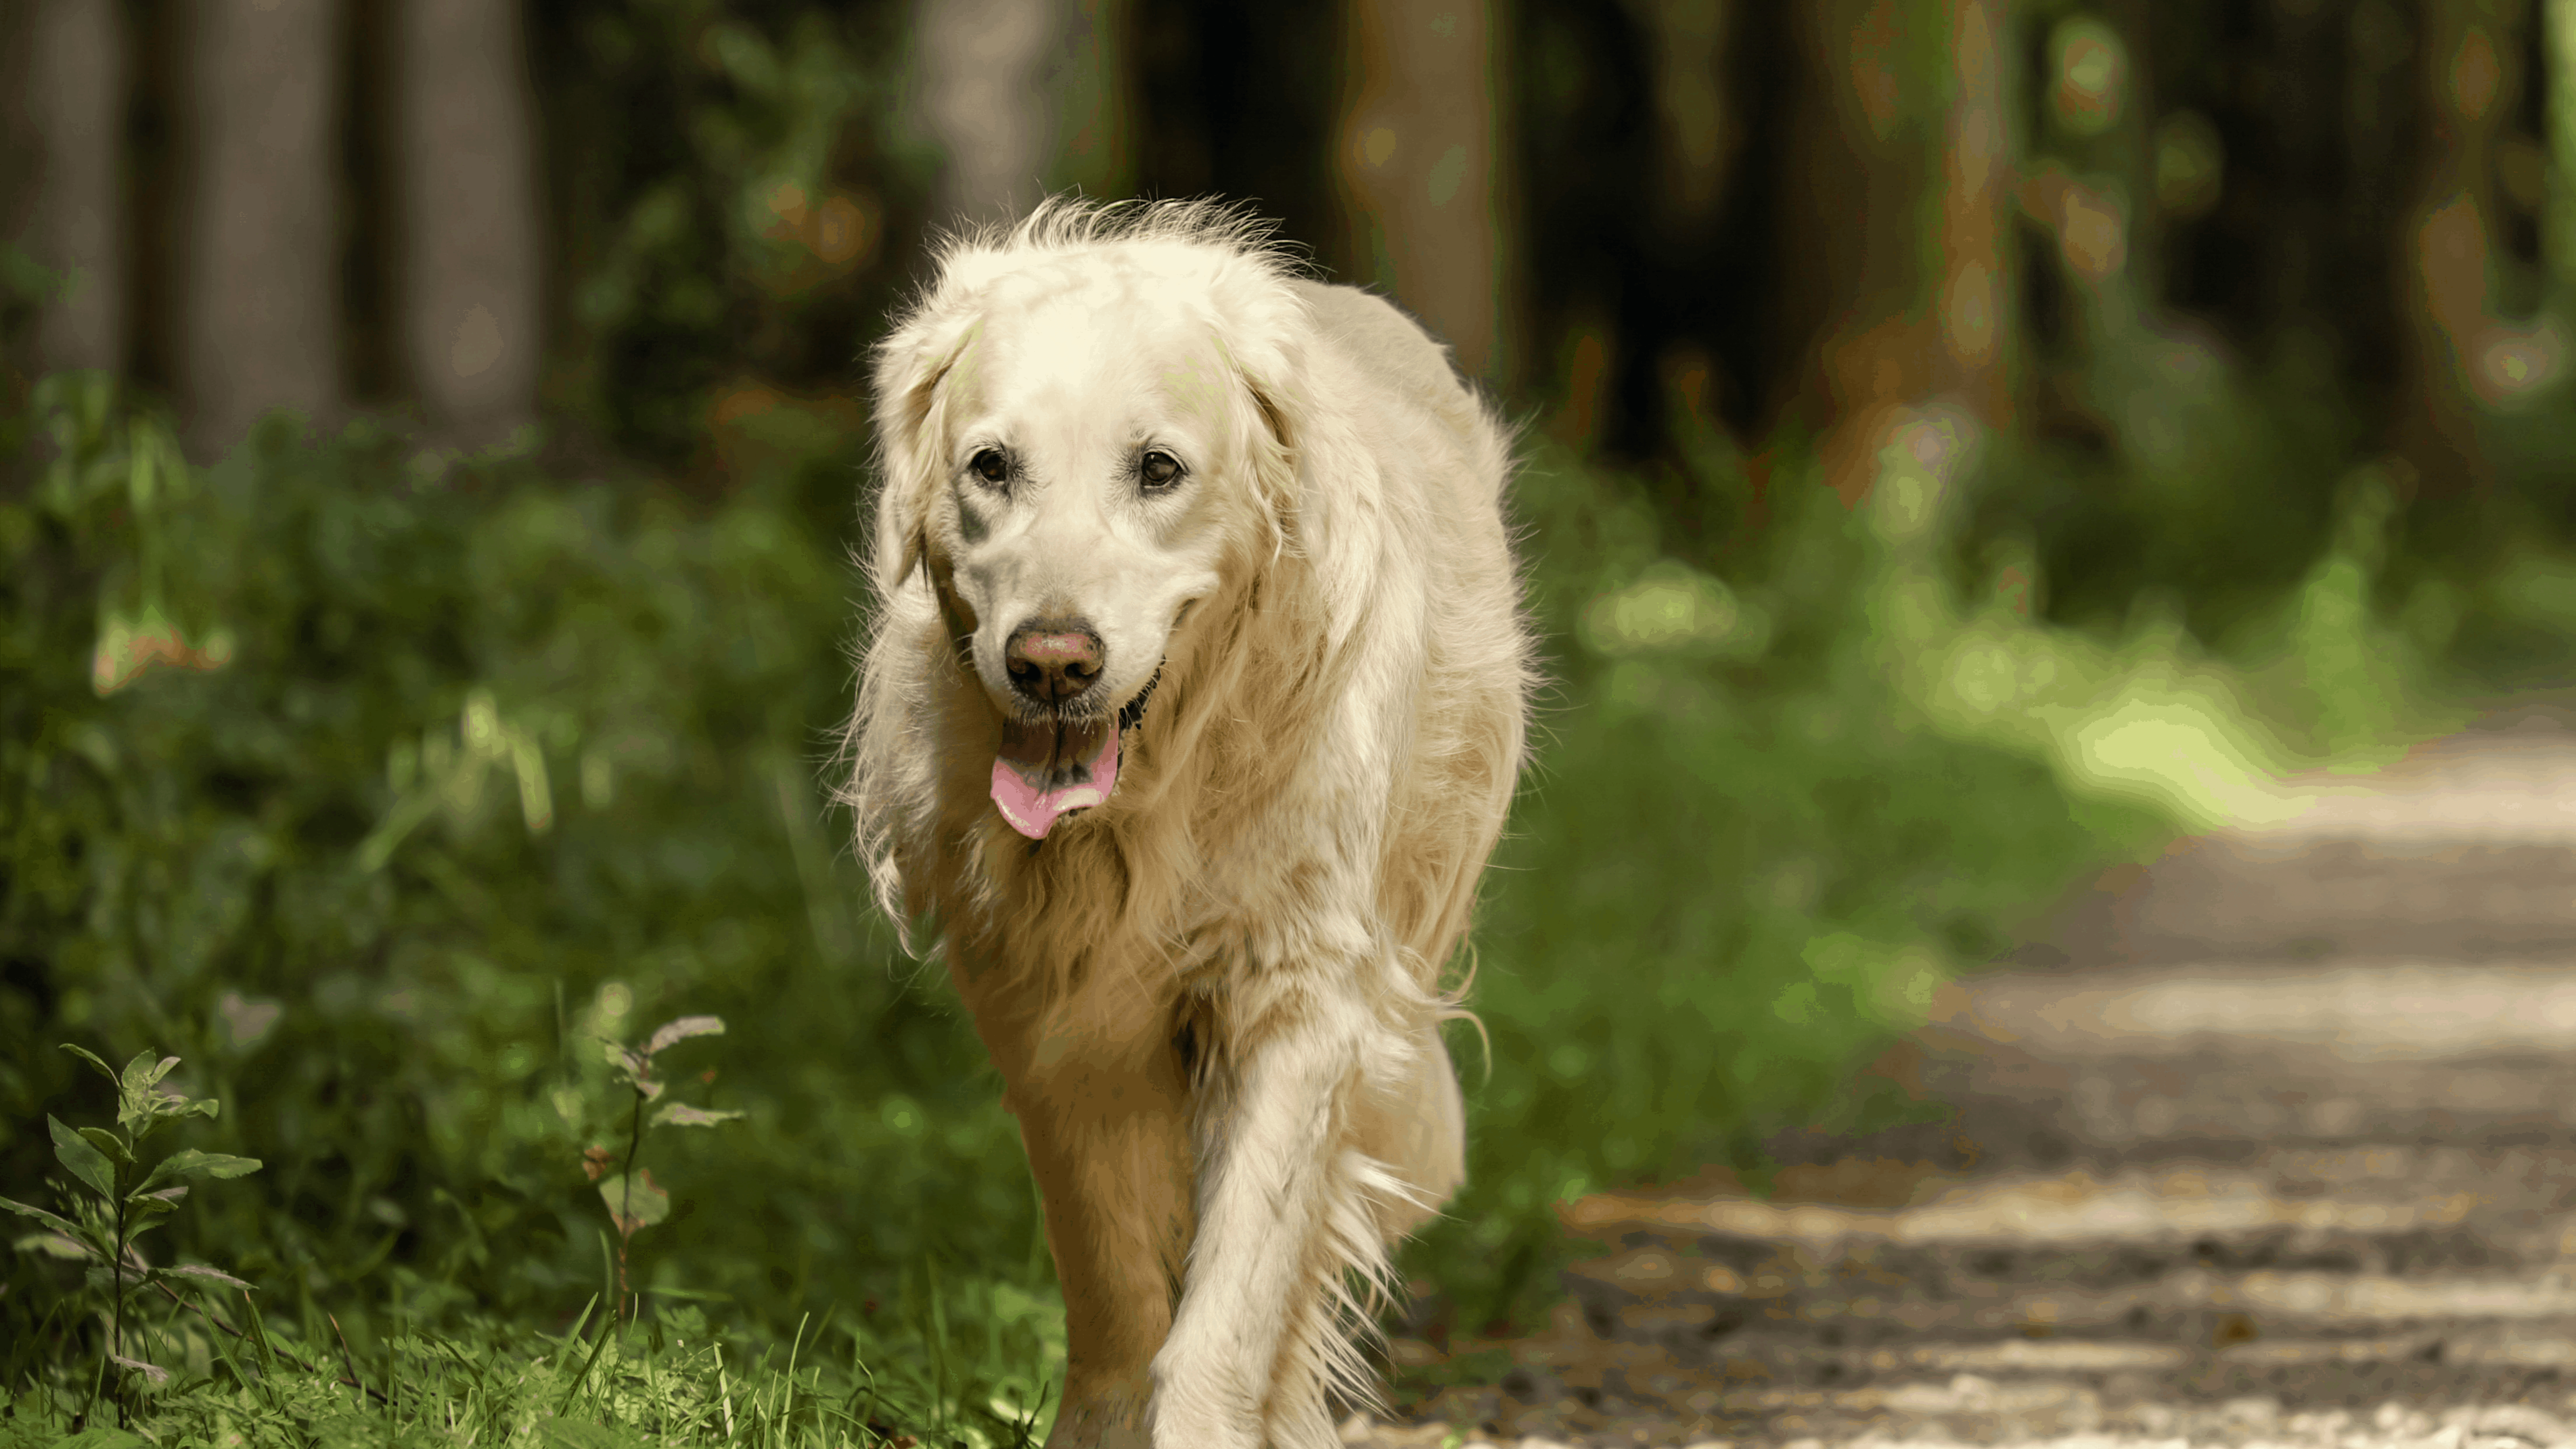 Exercising helps release your dog's energy.